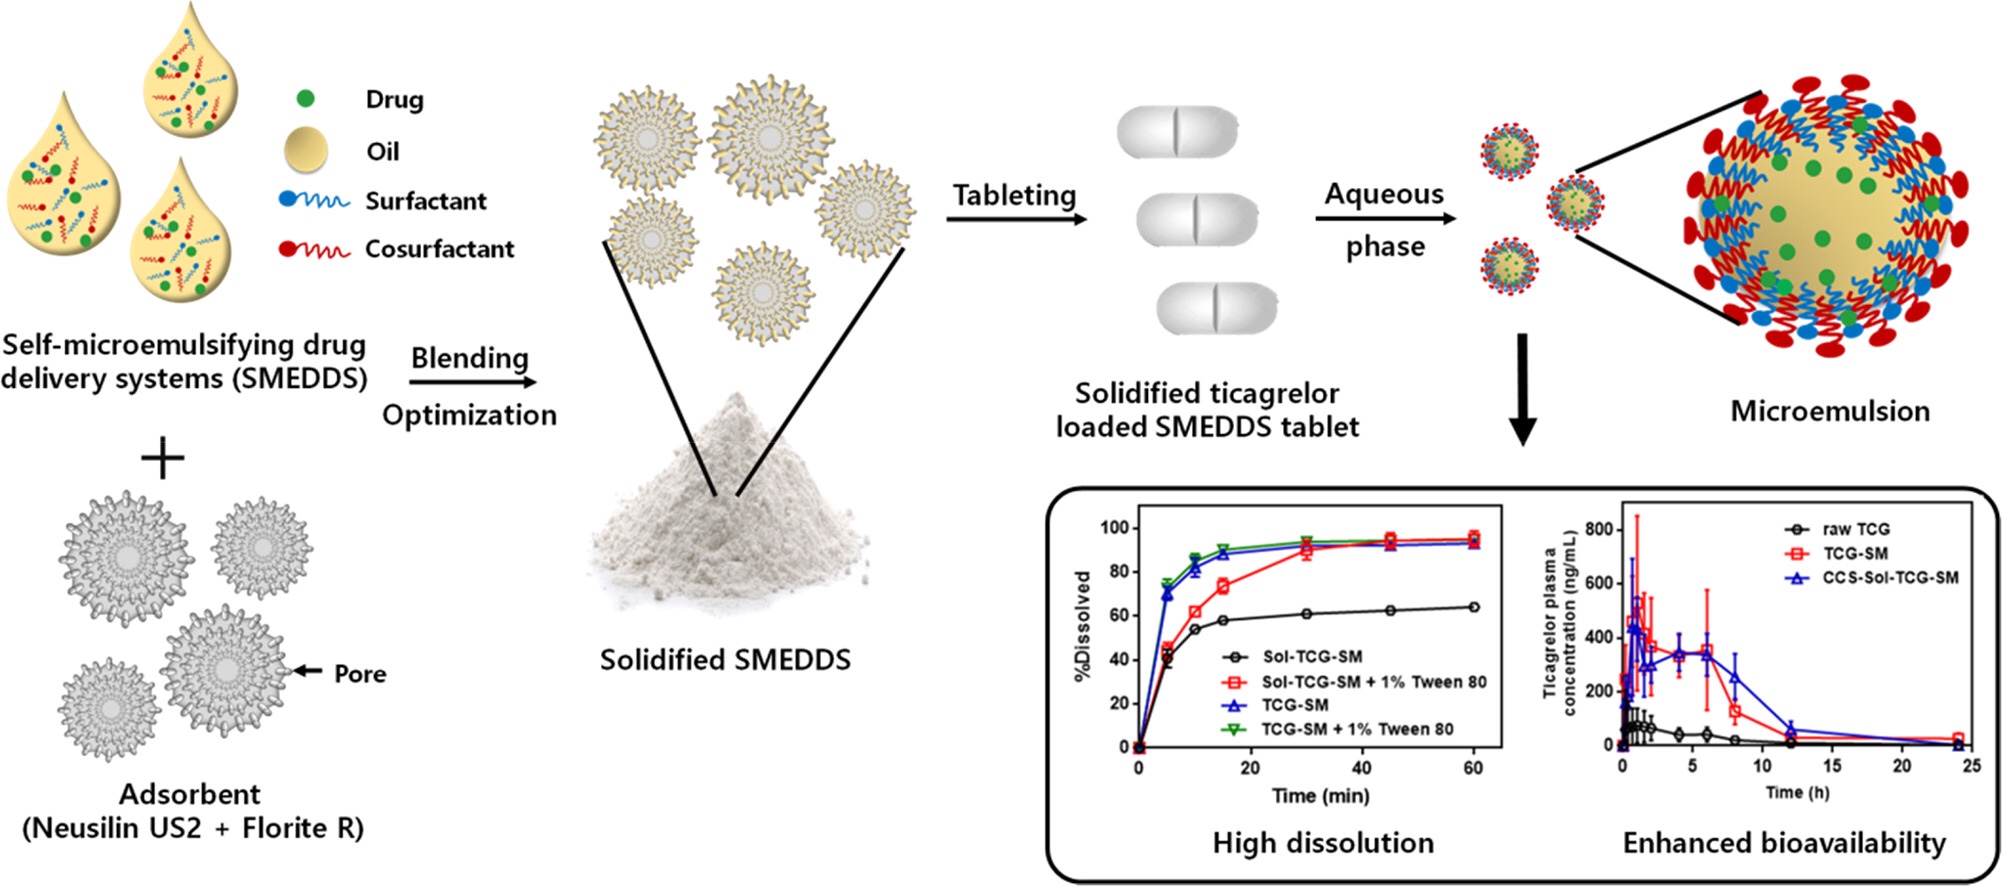 solidifying-ticagrelor-loaded-self-microemulsifying-drug-delivery-system